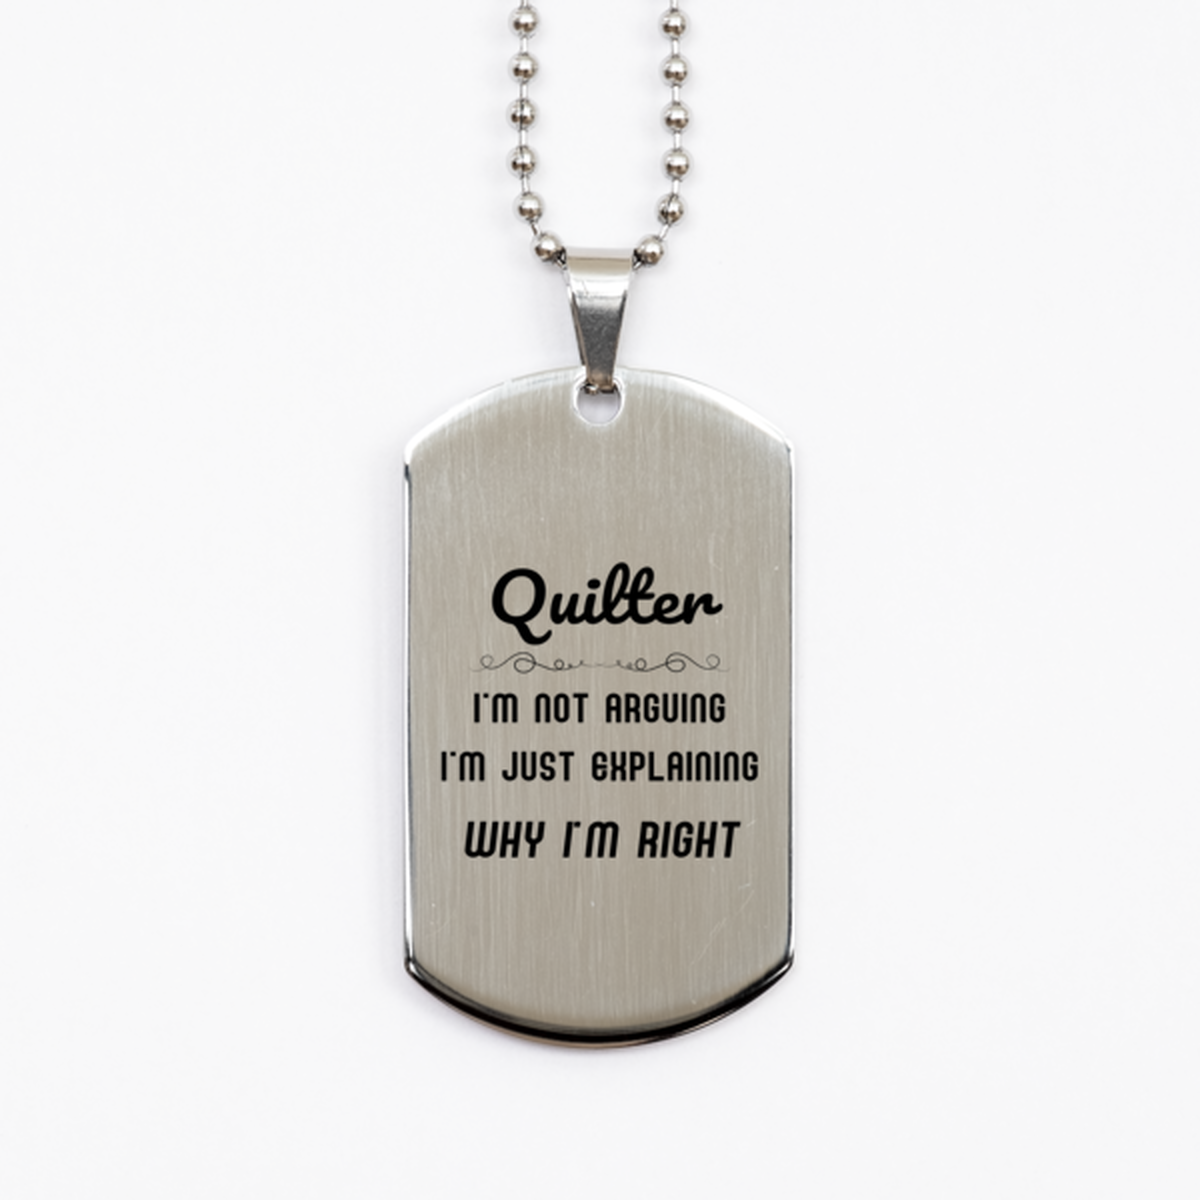 Quilter I'm not Arguing. I'm Just Explaining Why I'm RIGHT Silver Dog Tag, Funny Saying Quote Quilter Gifts For Quilter Graduation Birthday Christmas Gifts for Men Women Coworker